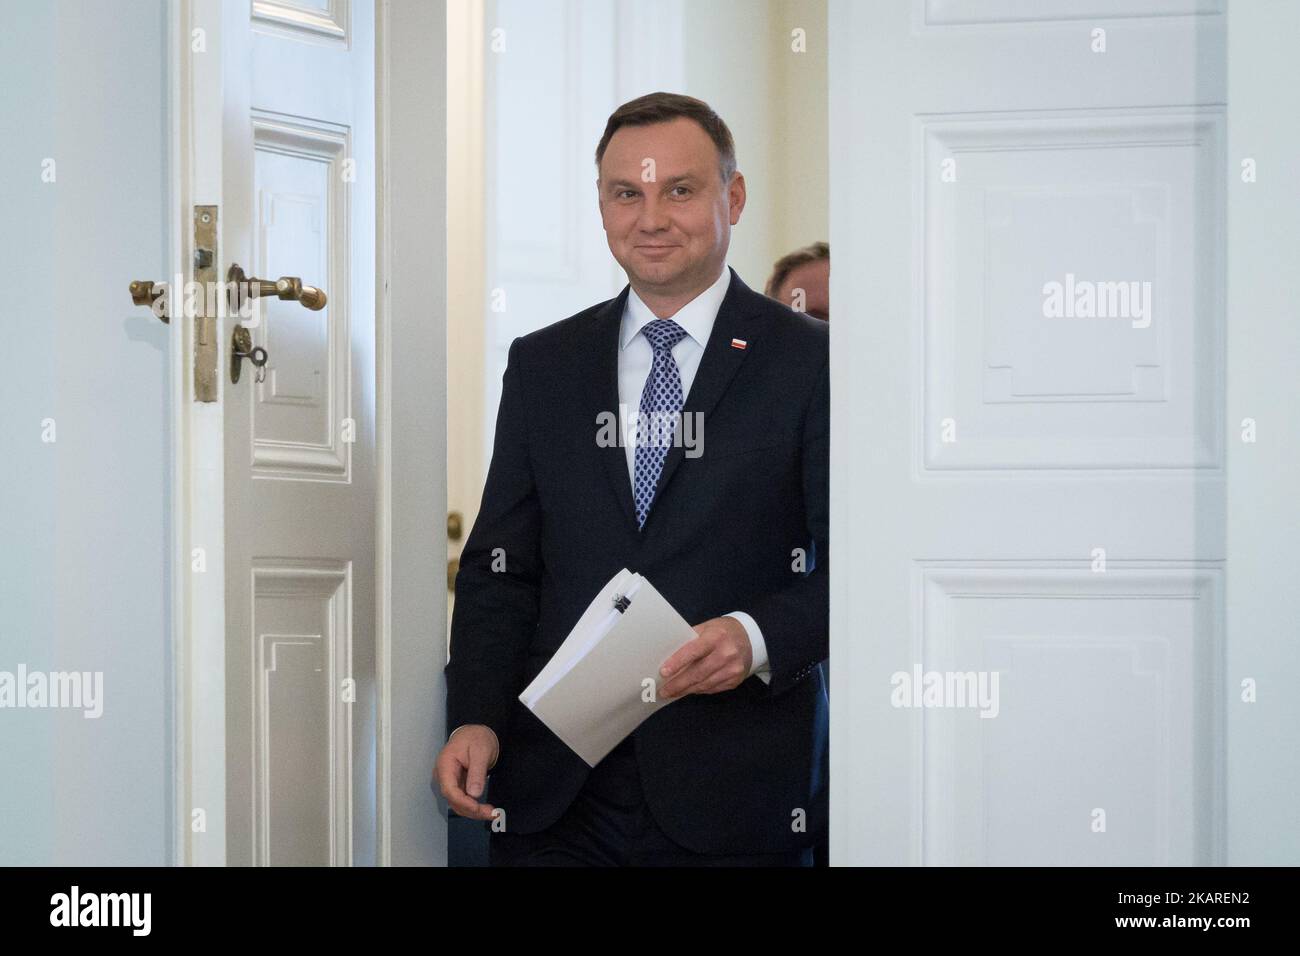 President of Poland Andrzej Duda during the press conference about Polish judicary system reforms at Presidential Palace in Warsaw, Poland on 25 September 2017. President Duda presented his draft legislation to reform the Supreme Court (SN) and the National Council of Judiciary (KRS). In July 2017, Duda vetoed Supreme Court and National Judiciary Council bills voted by the Polish Sejm's majority. Large protests have been held across Poland over rules passed 20 July by the ruling party that would limit the independence of the judiciary. (Photo by Mateusz Wlodarczyk/NurPhoto) Stock Photo